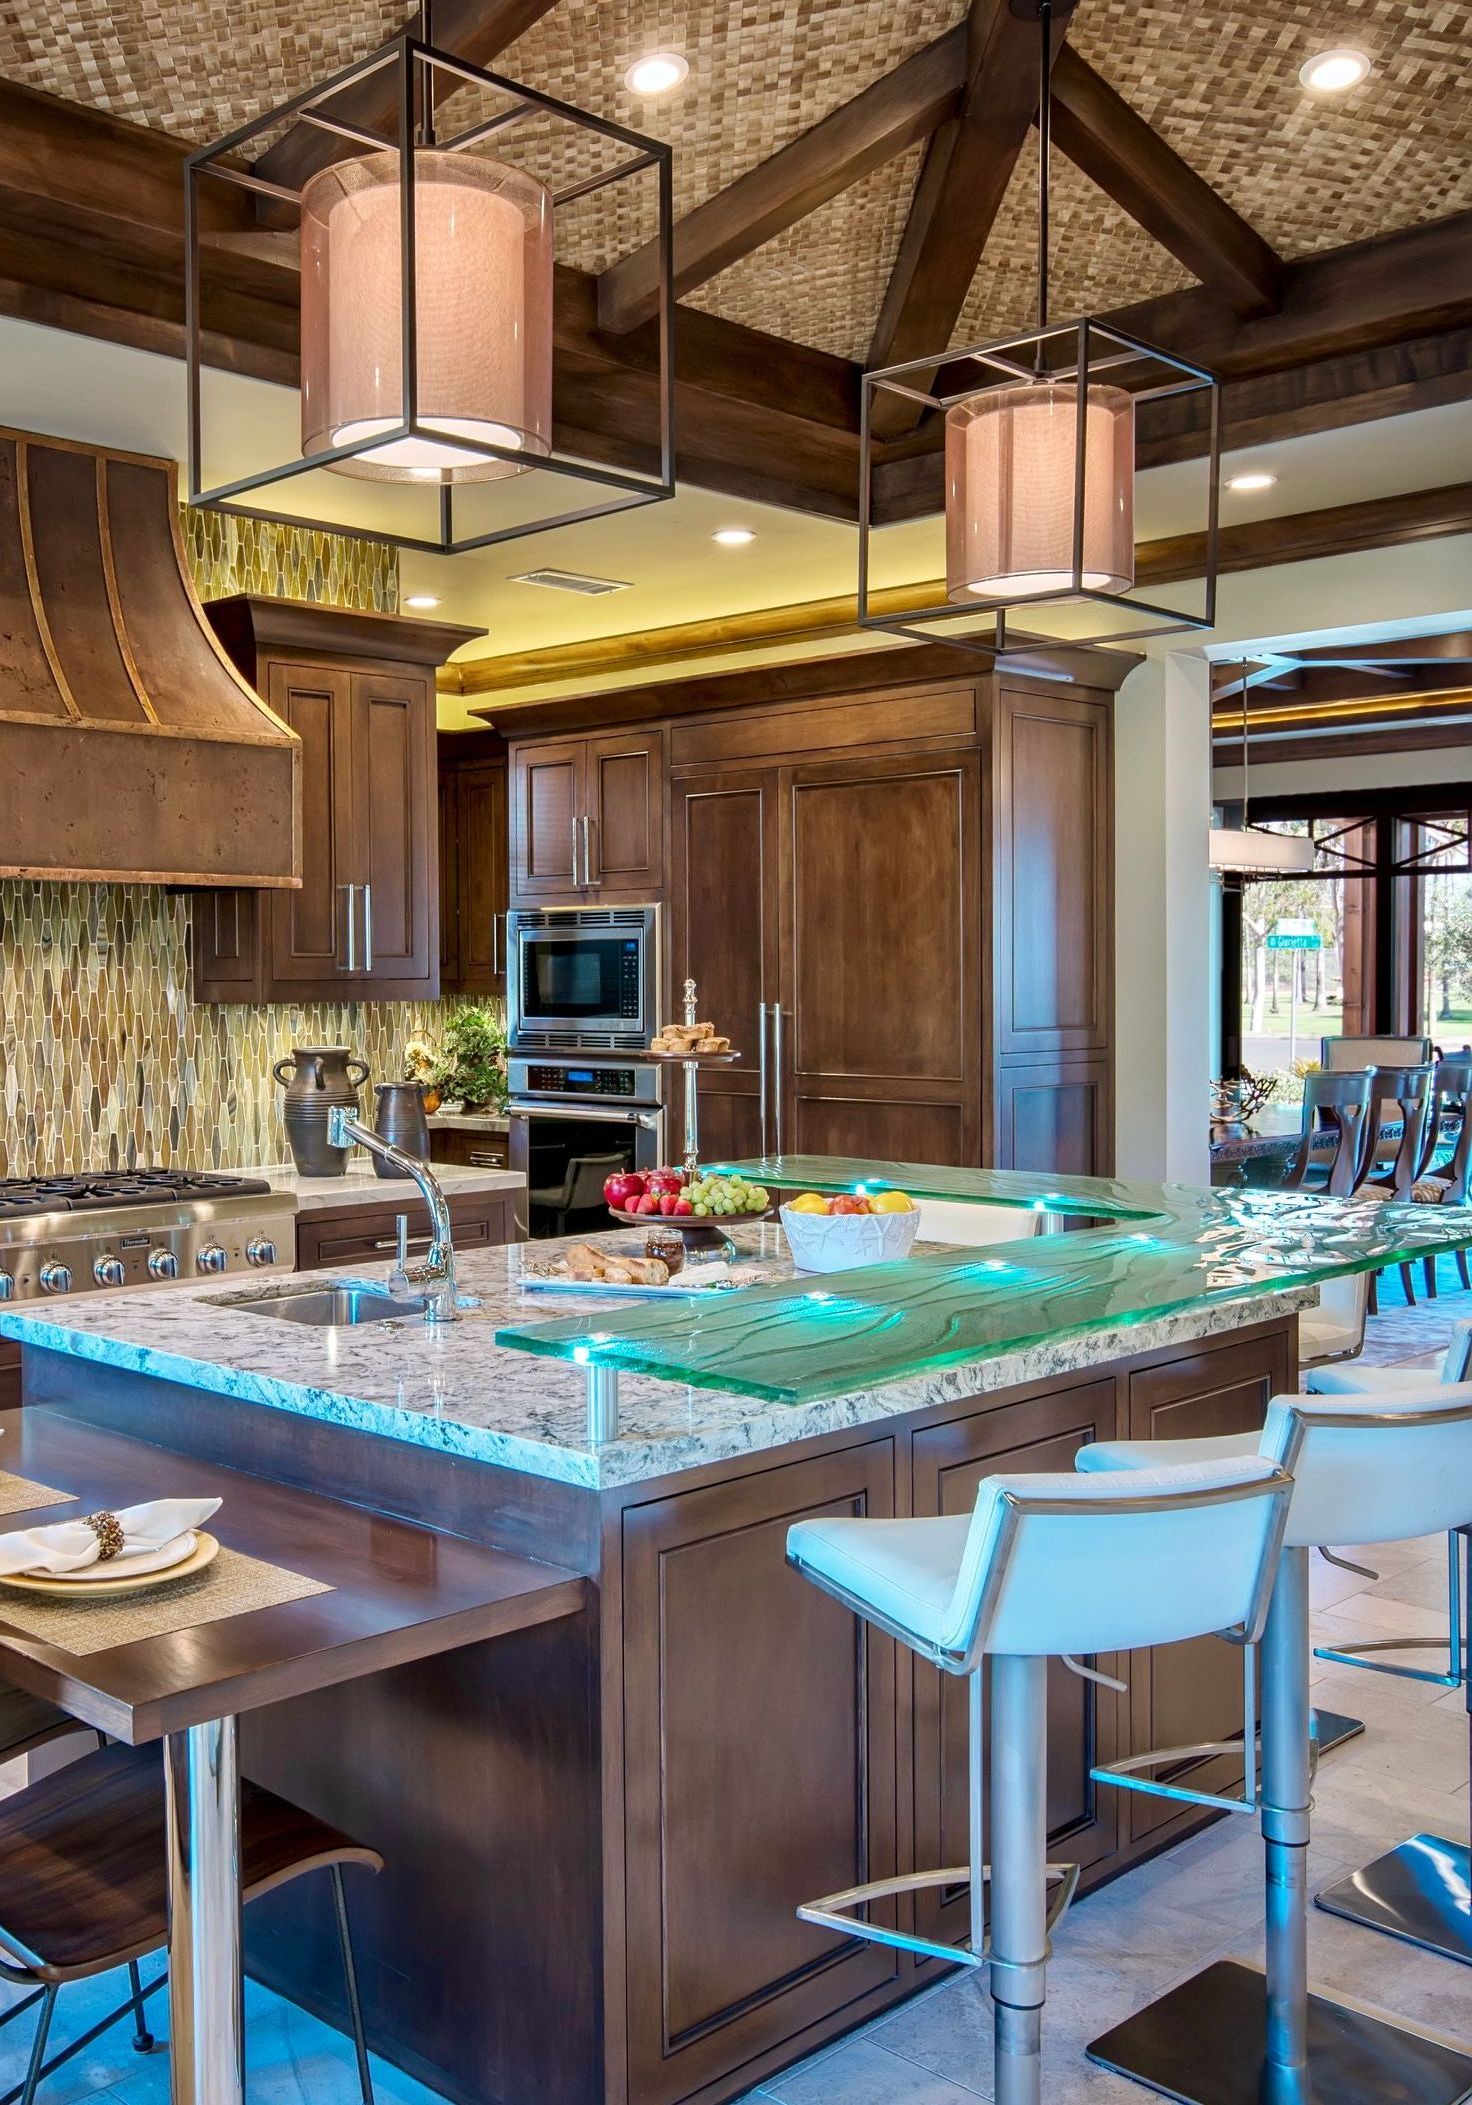 A textured custom glass countertop in a residential kitchen.